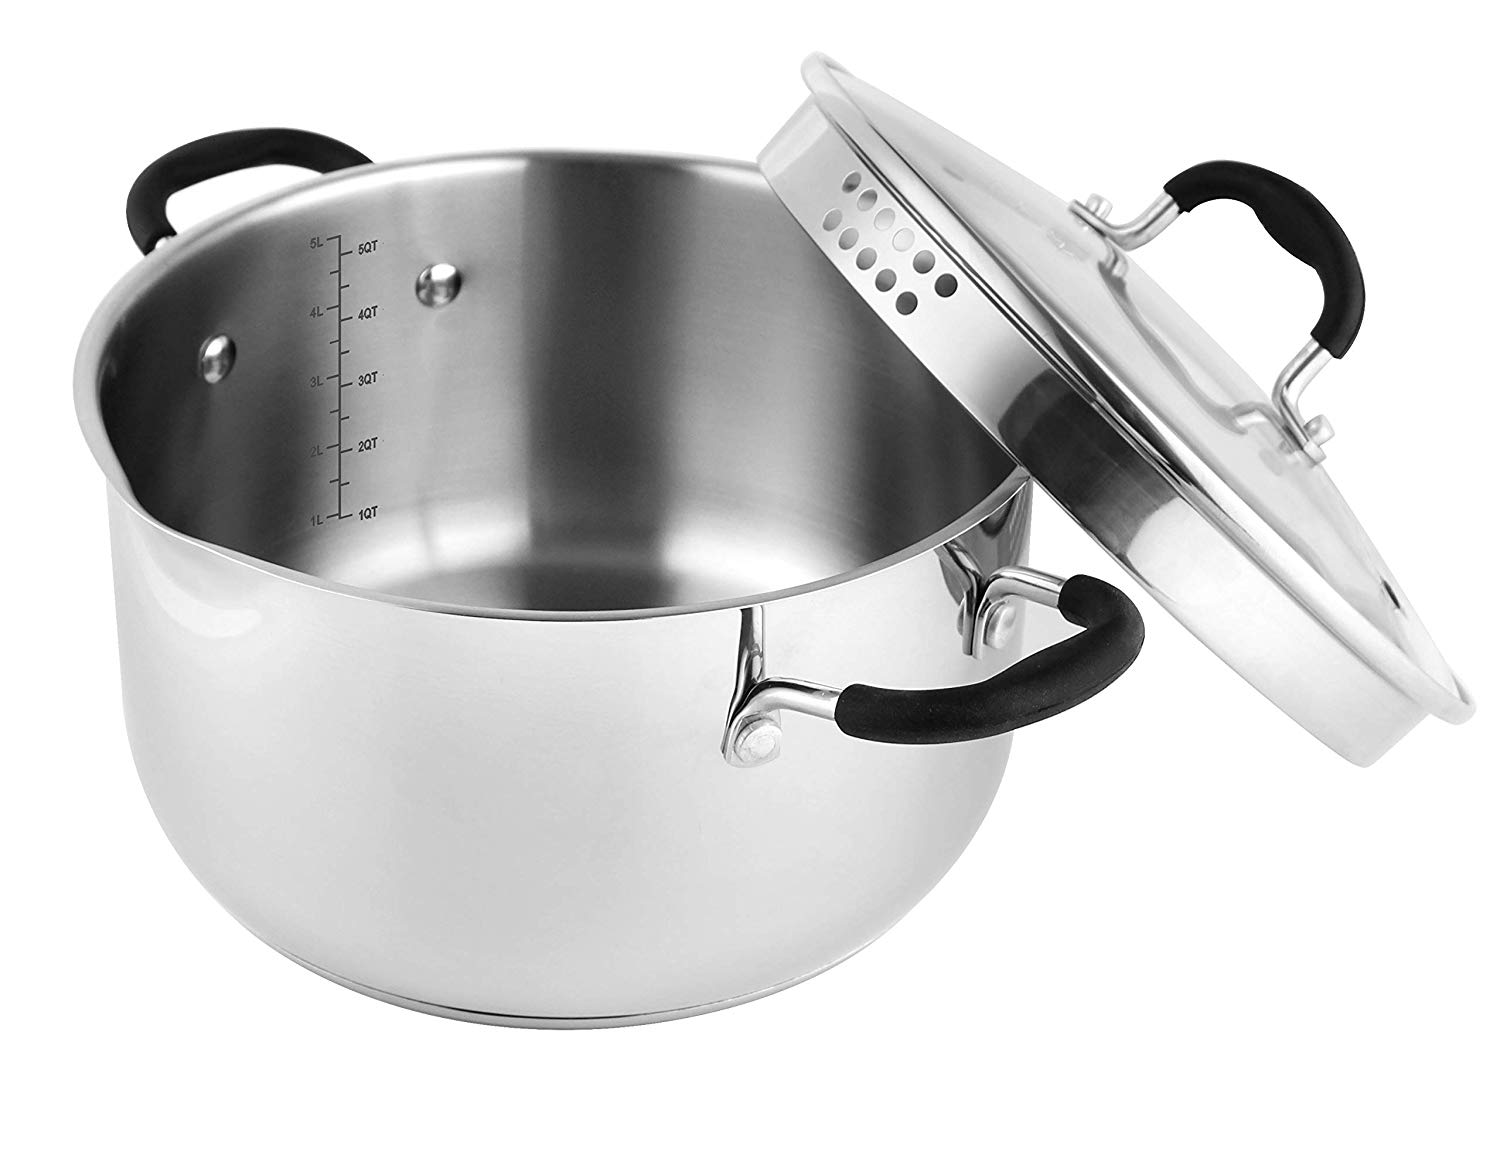 AVACRAFT Top Rated Stainless Steel Stockpot with Glass Strainer Lid, 6 Quart Pot, Saucepan cookware, Side Spouts, Multipurpose Stock Pot, Sauce Pot, Soup Pot in our Pots and Pans, Induction Pan (6QT)